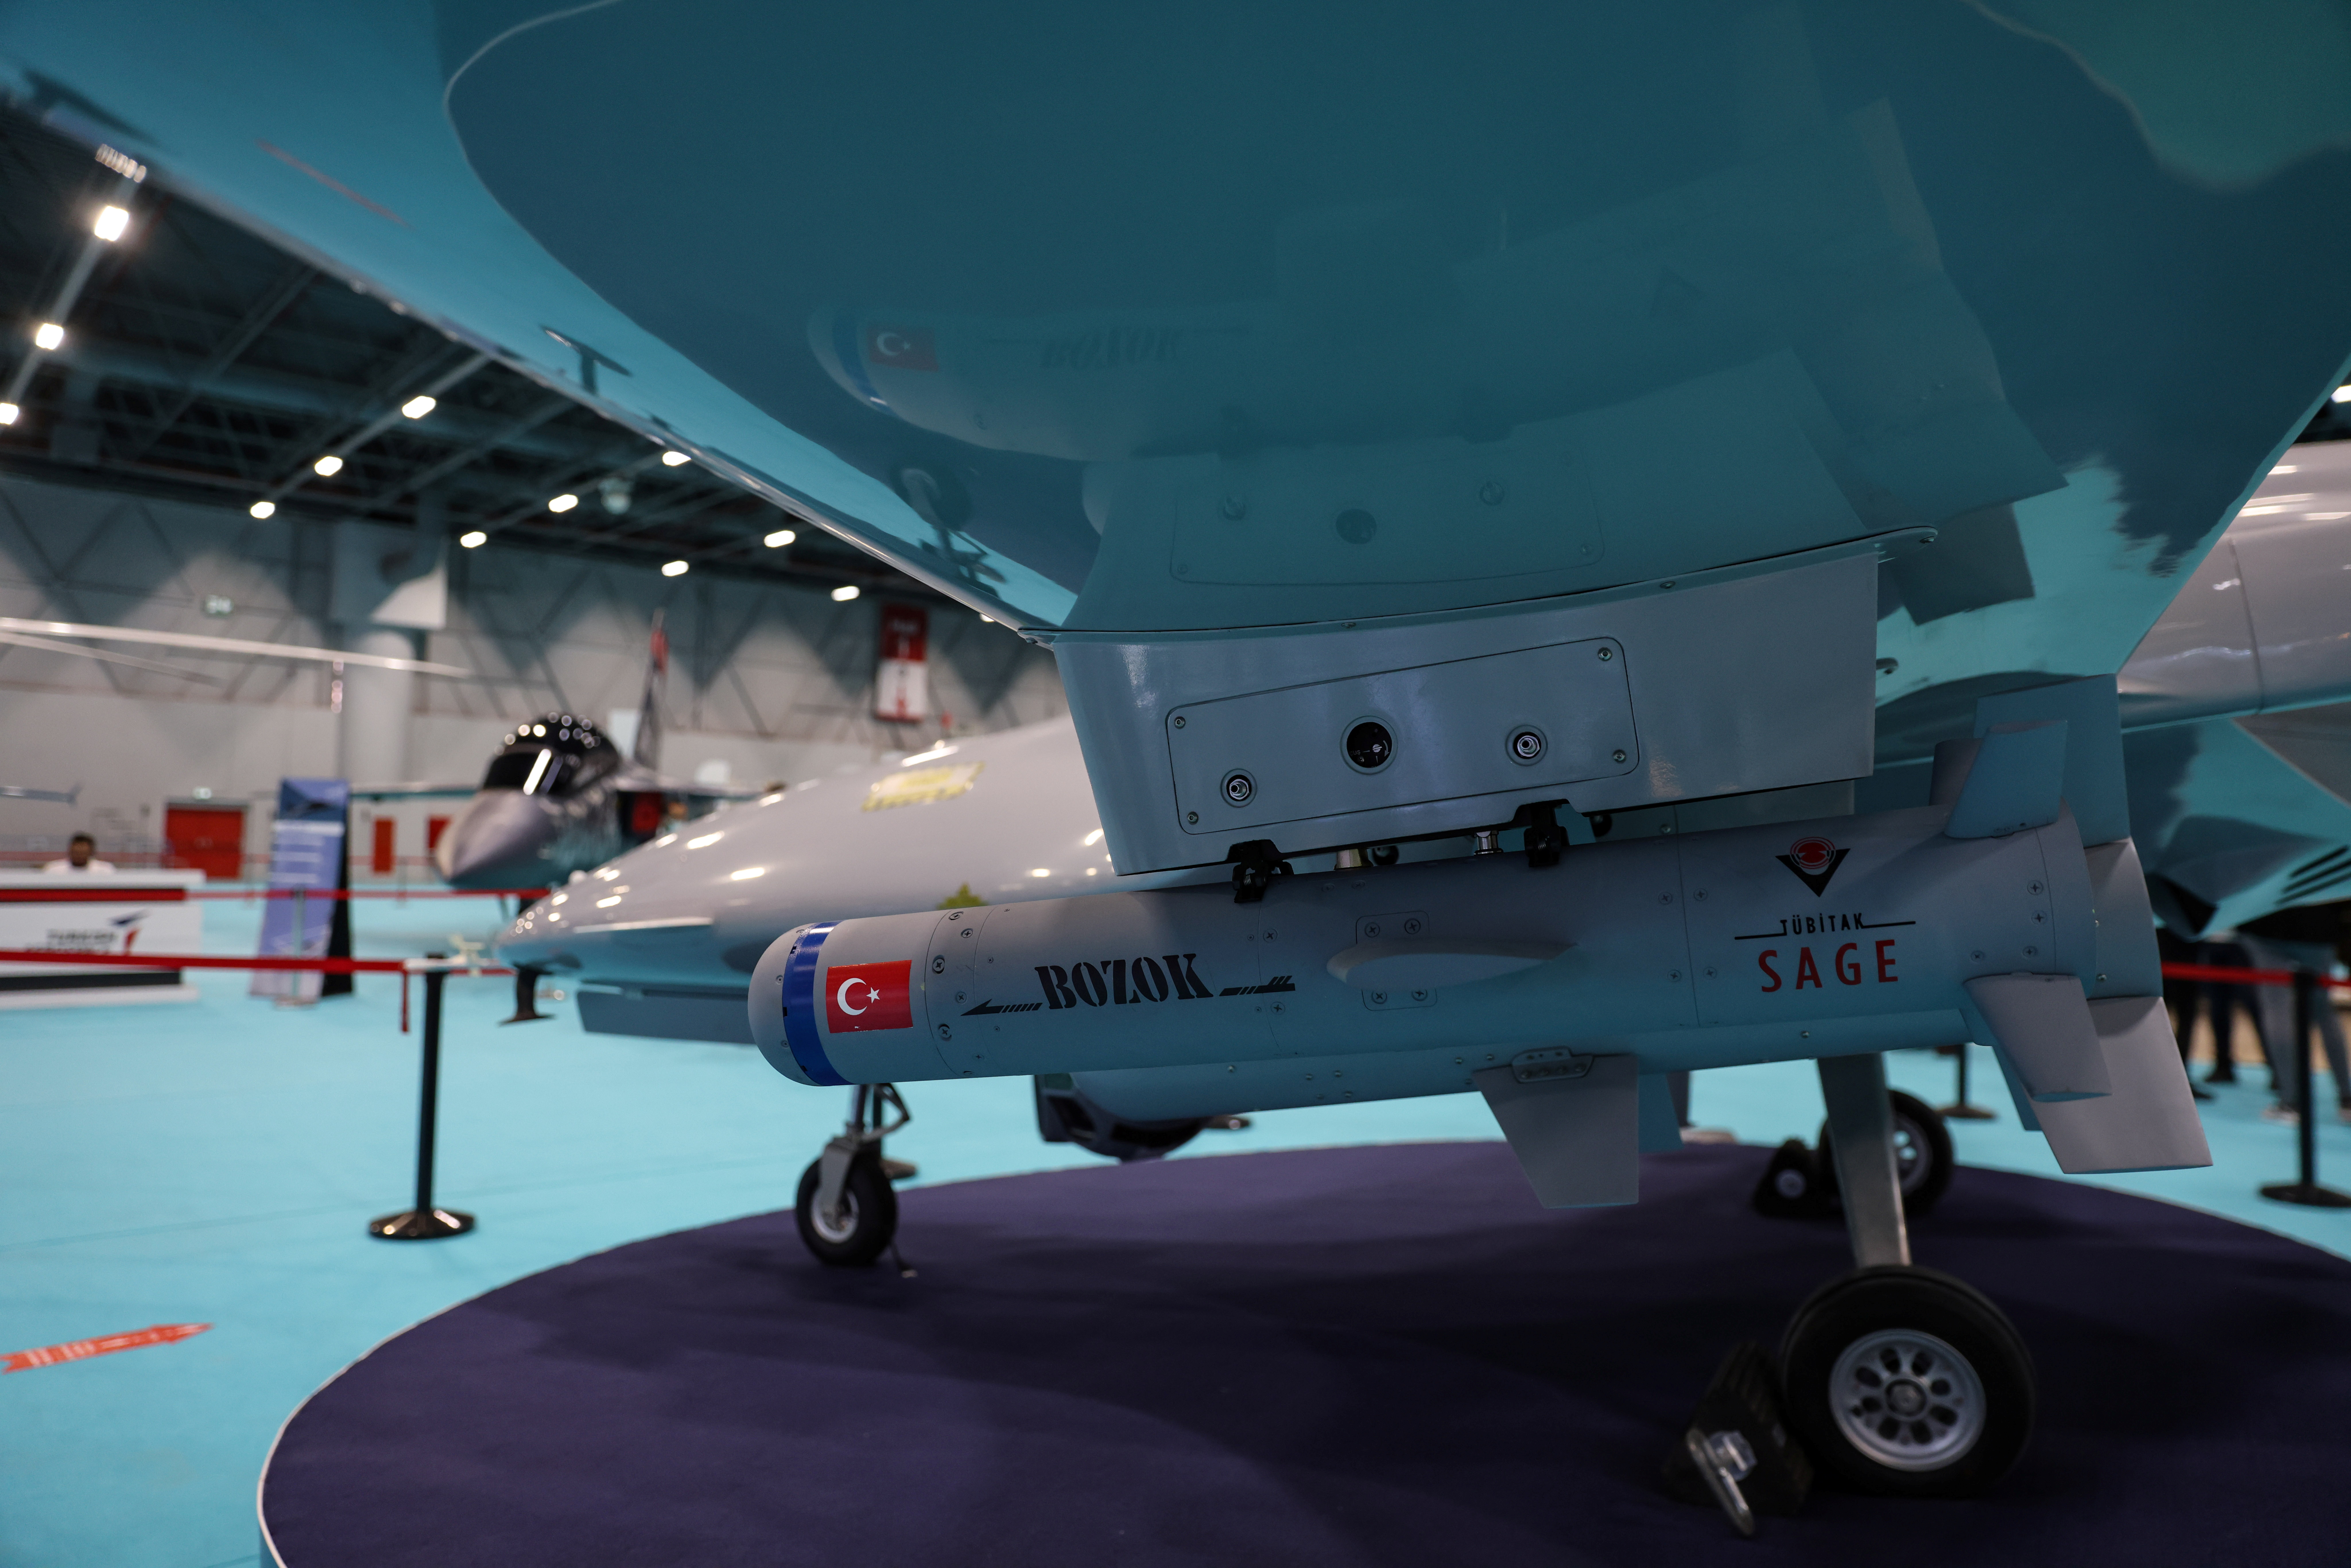 TB2 drone of Turkish drone-maker Baykar is seen at a stand during the first day of SAHA EXPO Defence & Aerospace Exhibition in Istanbul